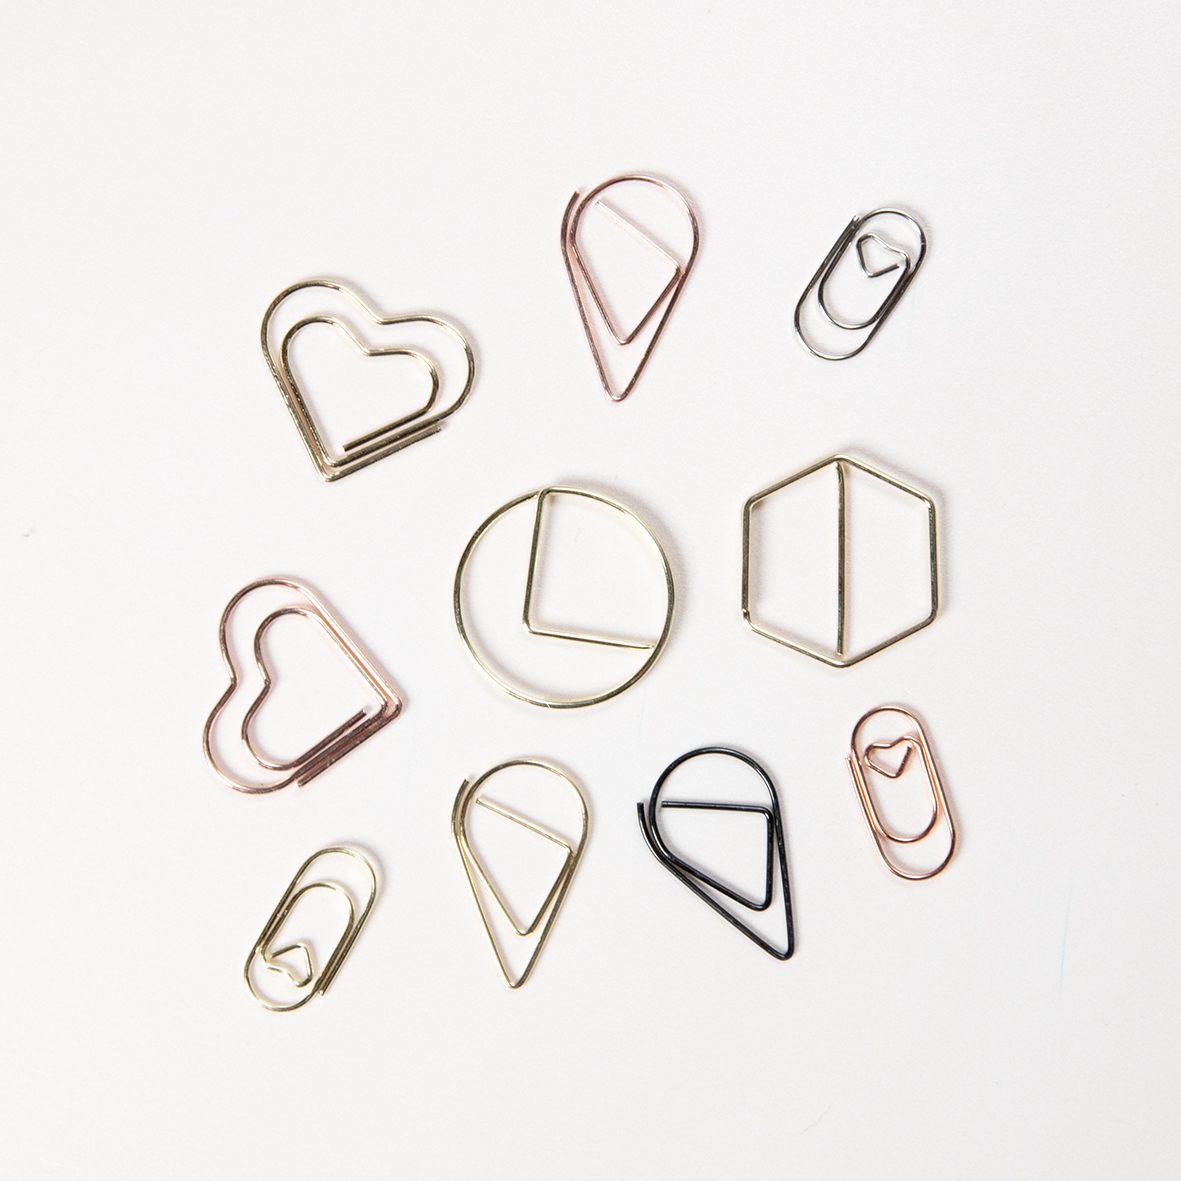 Sample paperclips 